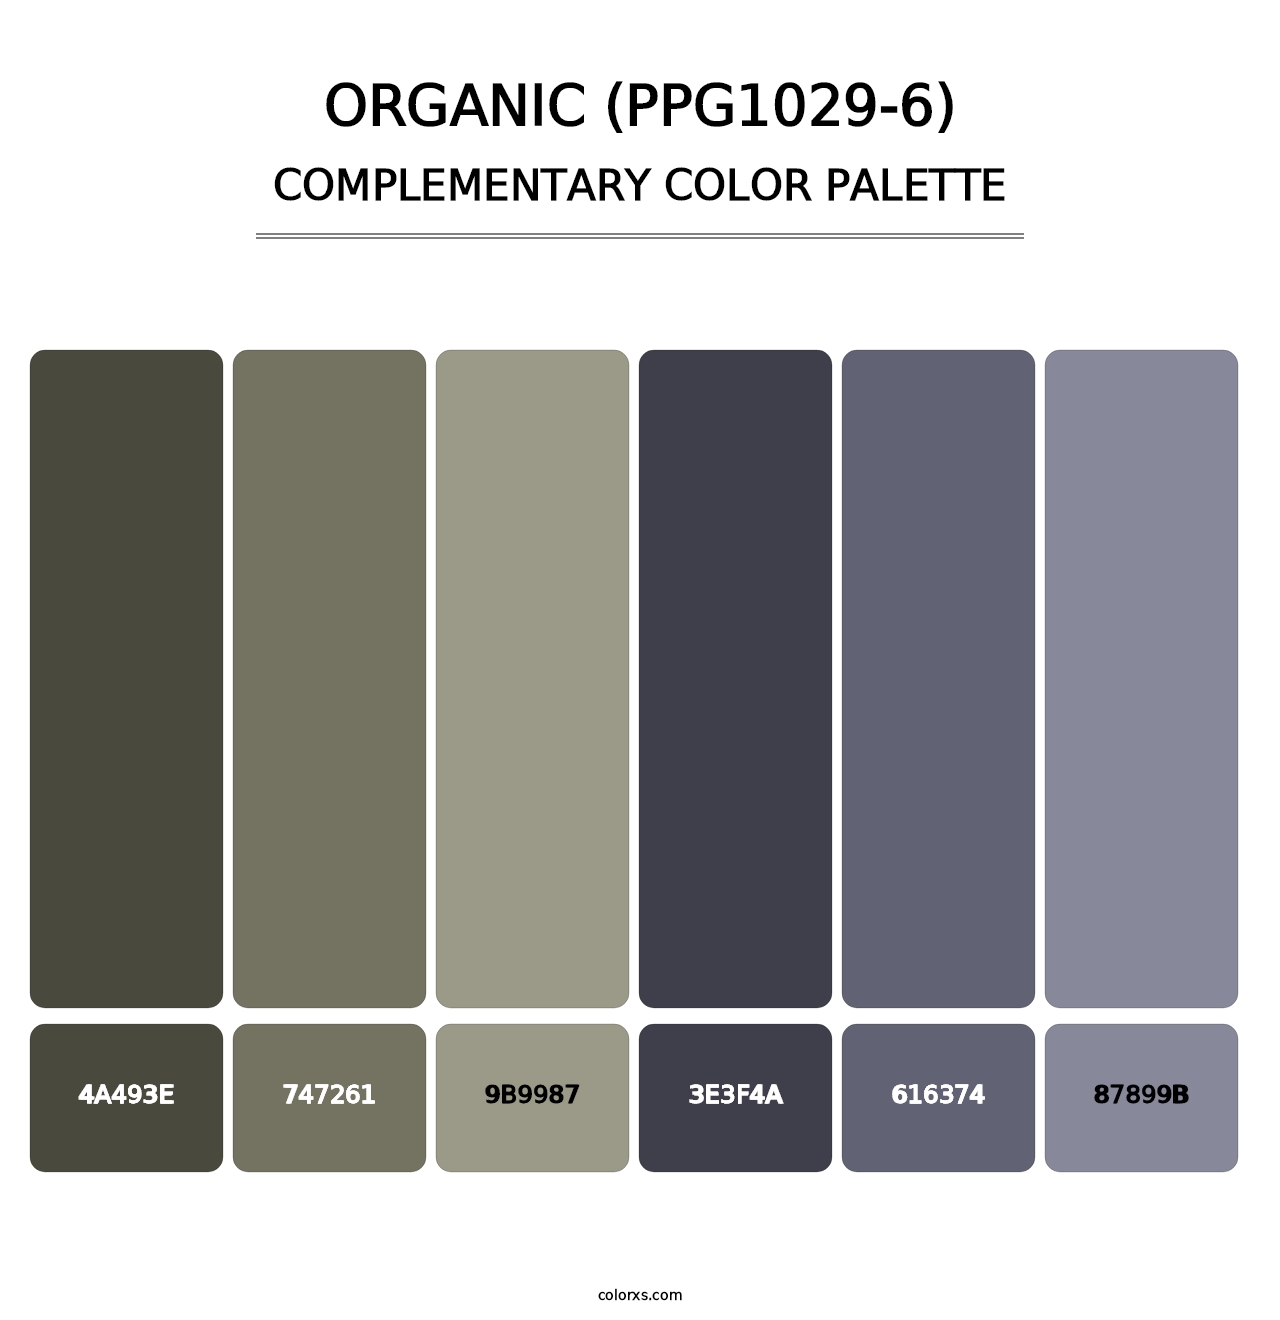 Organic (PPG1029-6) - Complementary Color Palette